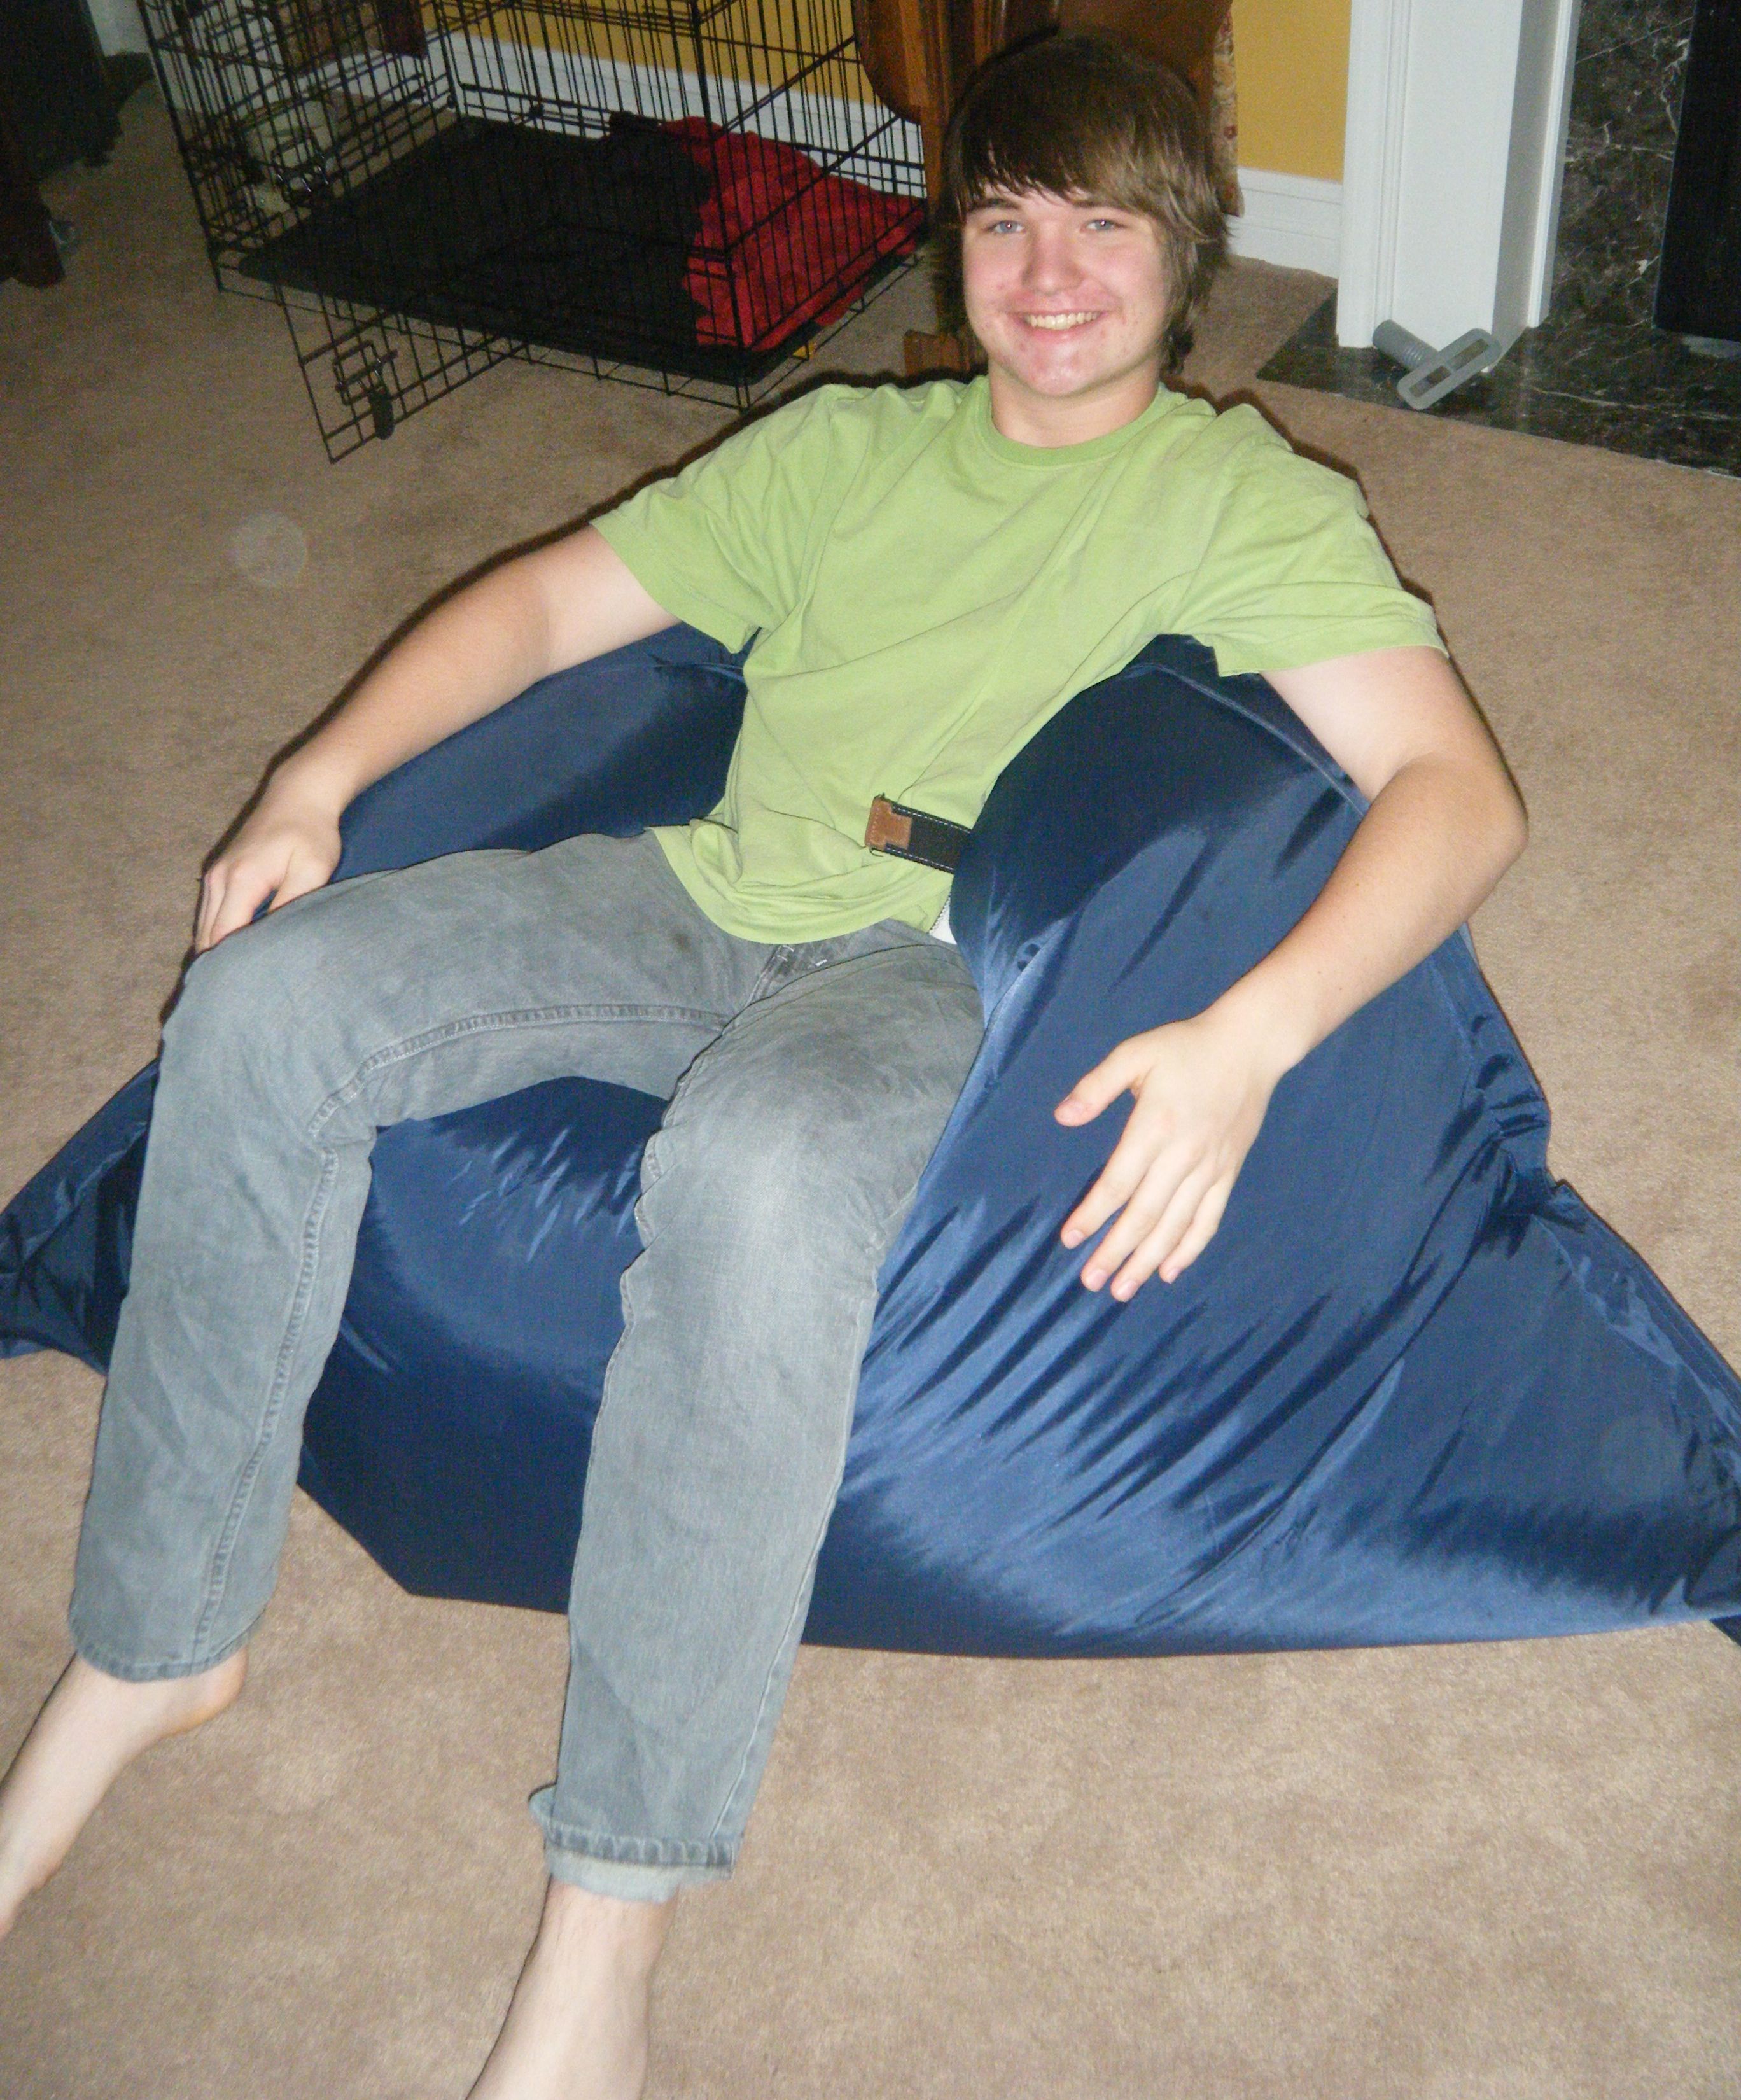 Ultra-Comfy Chair Review: Sumo Lounge Omni Beanbag Chair